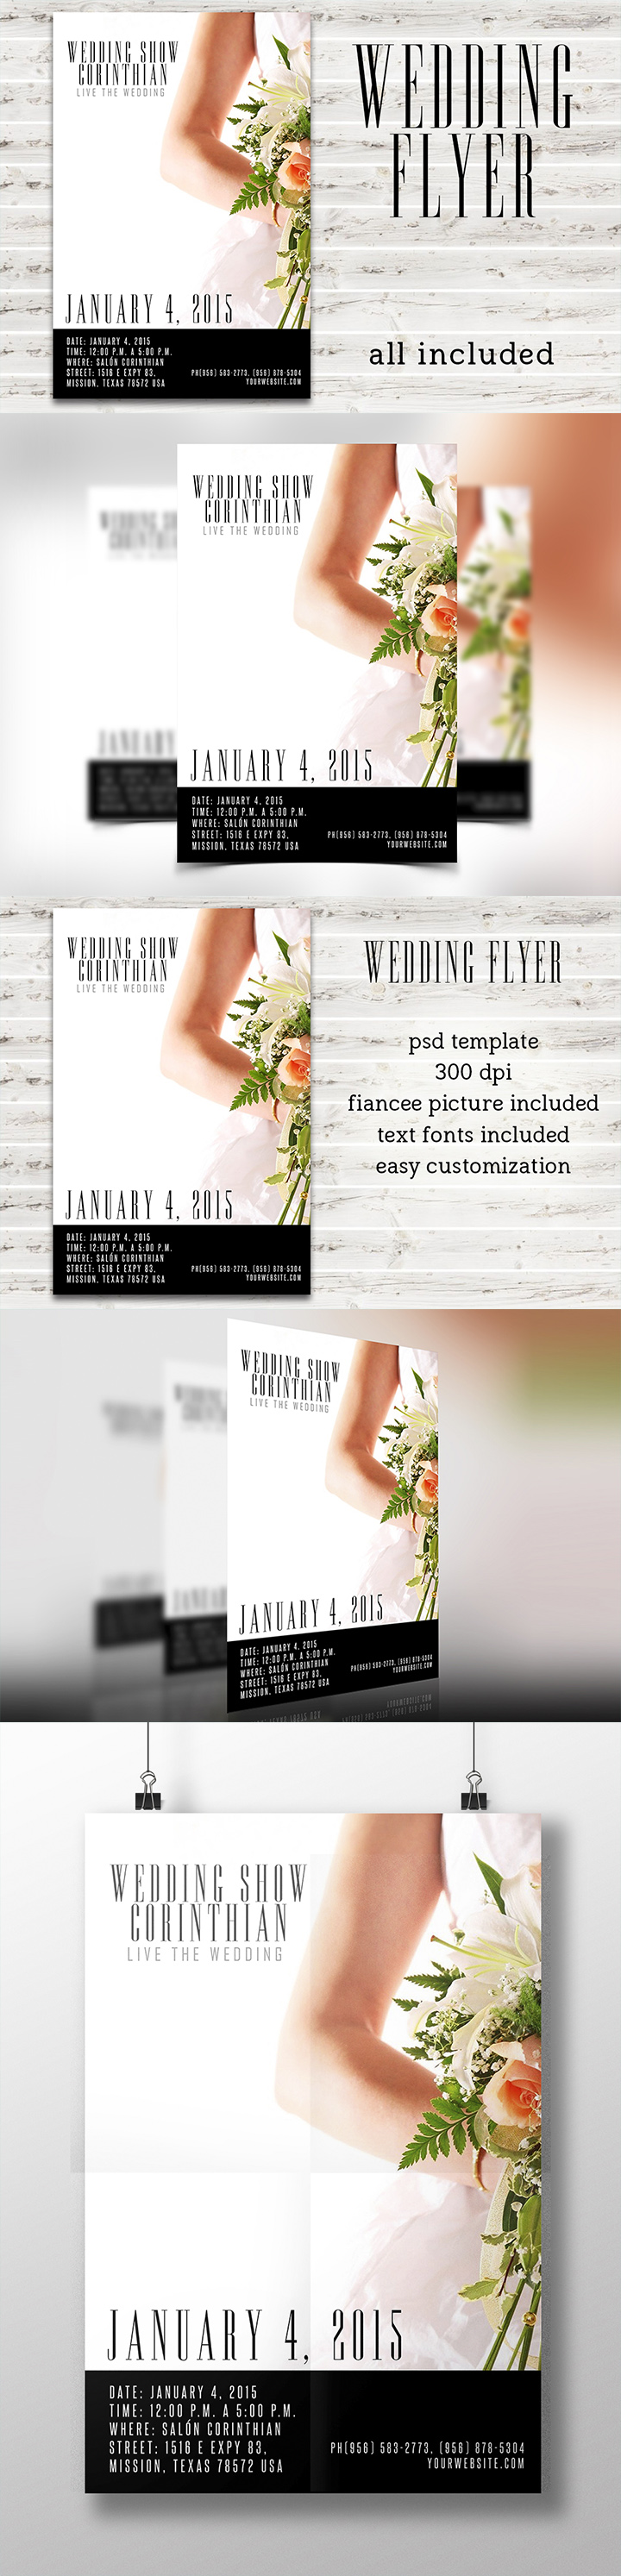 wedding-flyer-template-psd-download-graphicfy